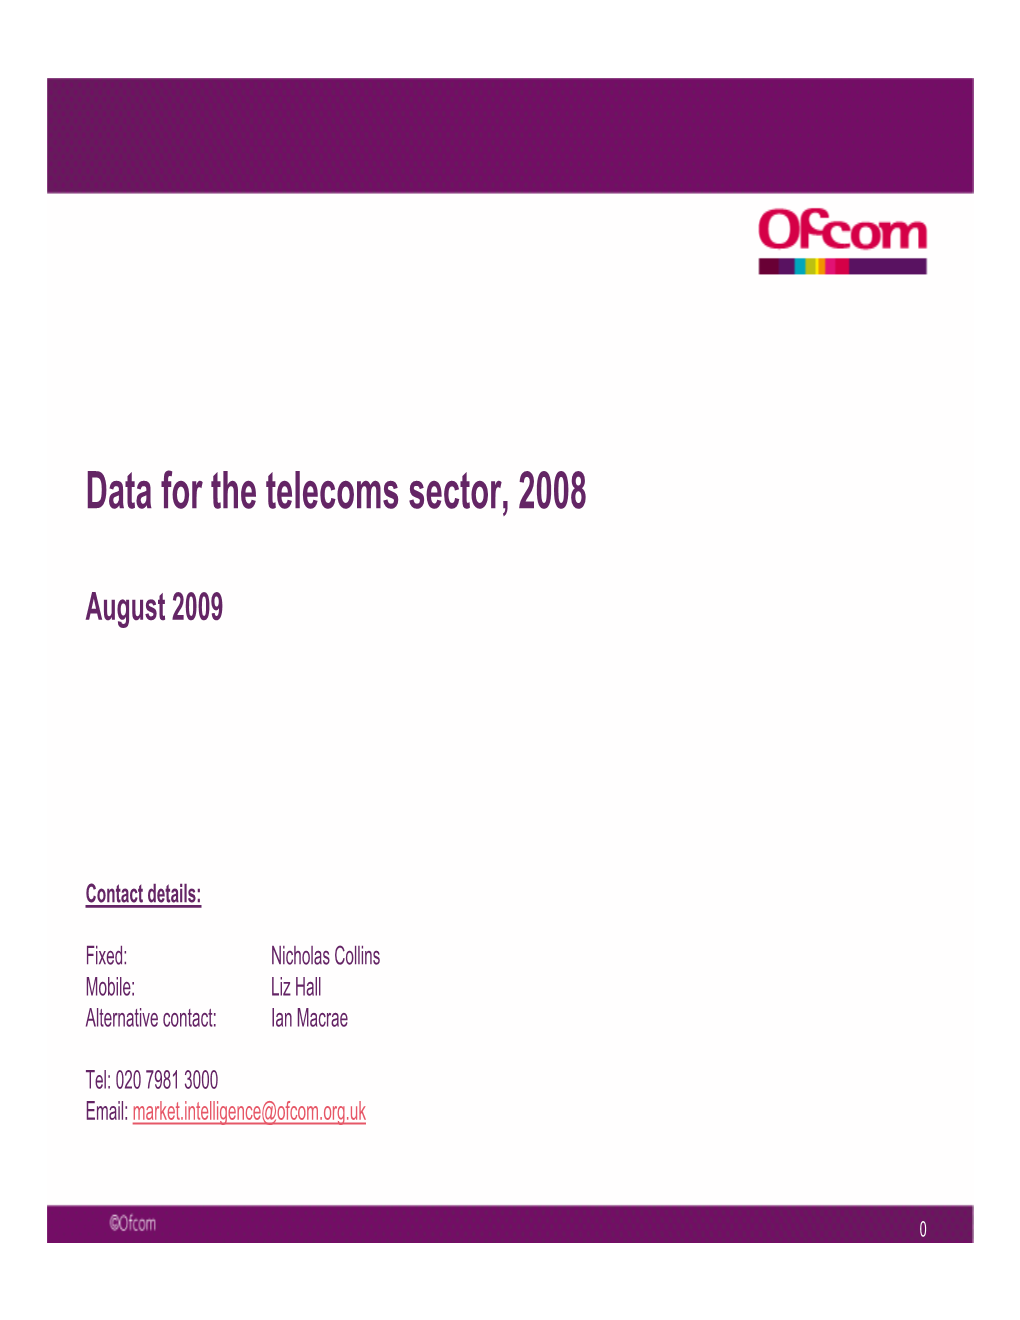 Data for the Telecoms Sector, 2008